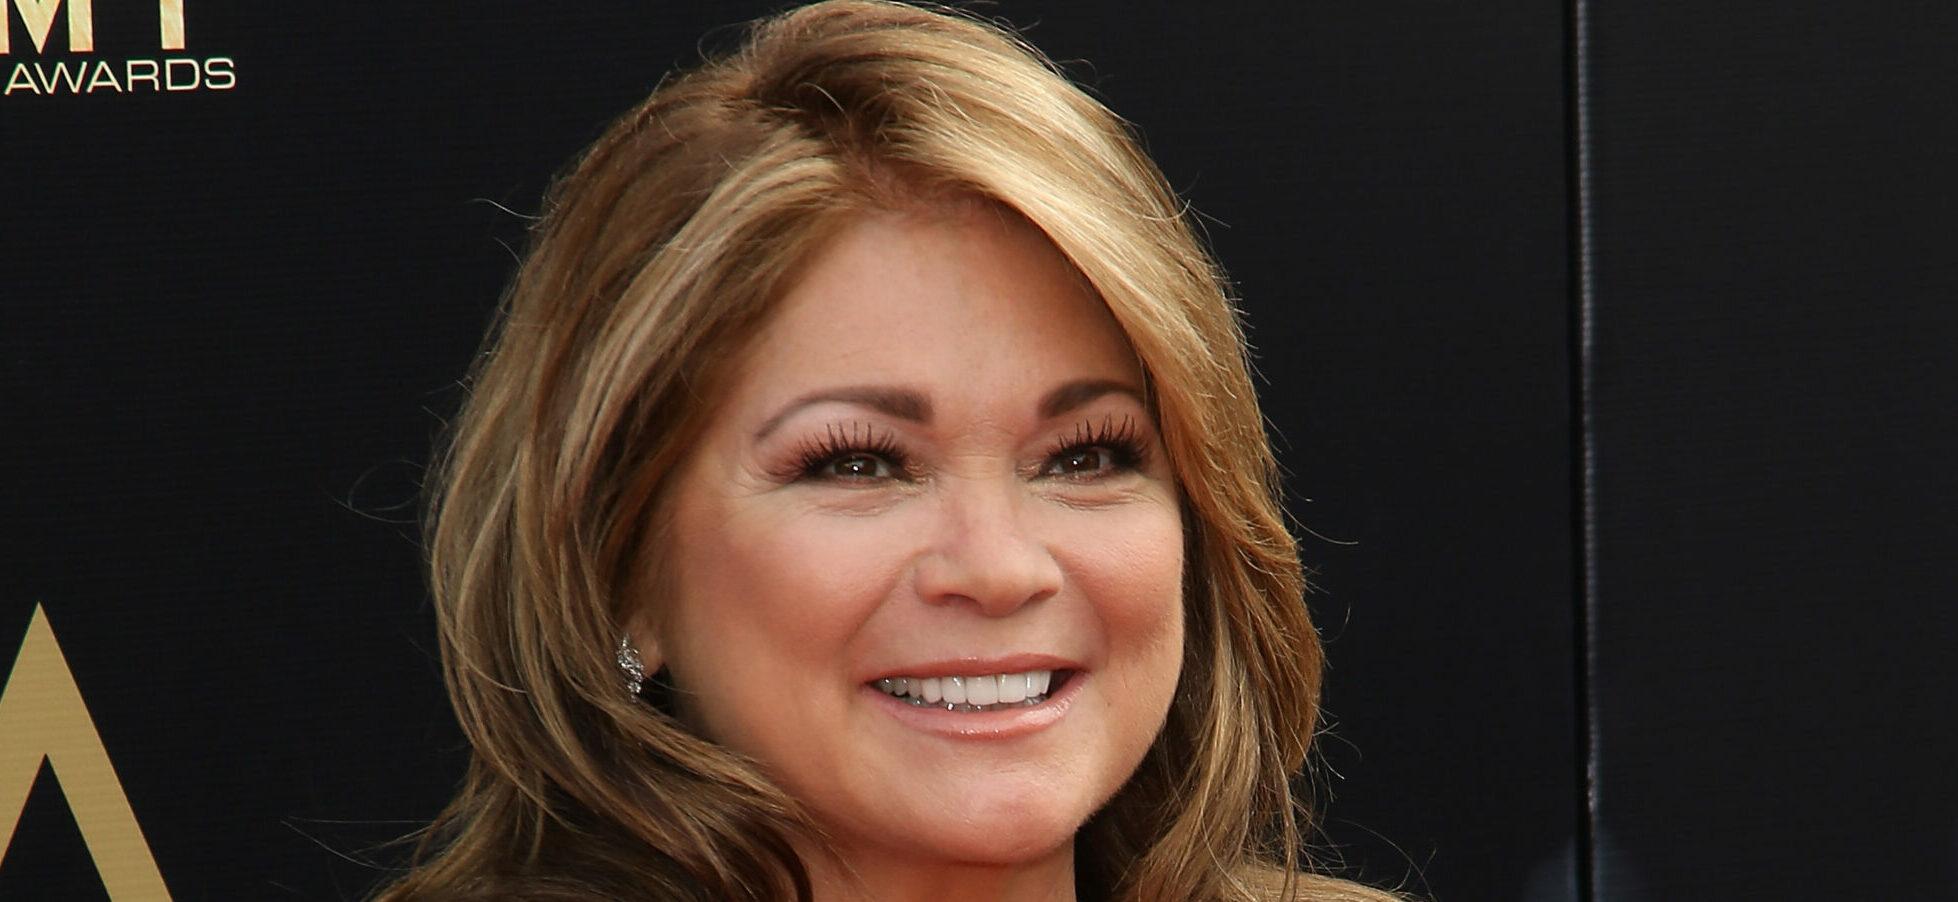 Valerie Bertinelli’s Son Shares Sweet Birthday Tribute As She Gets Ready To Watch Him Perform